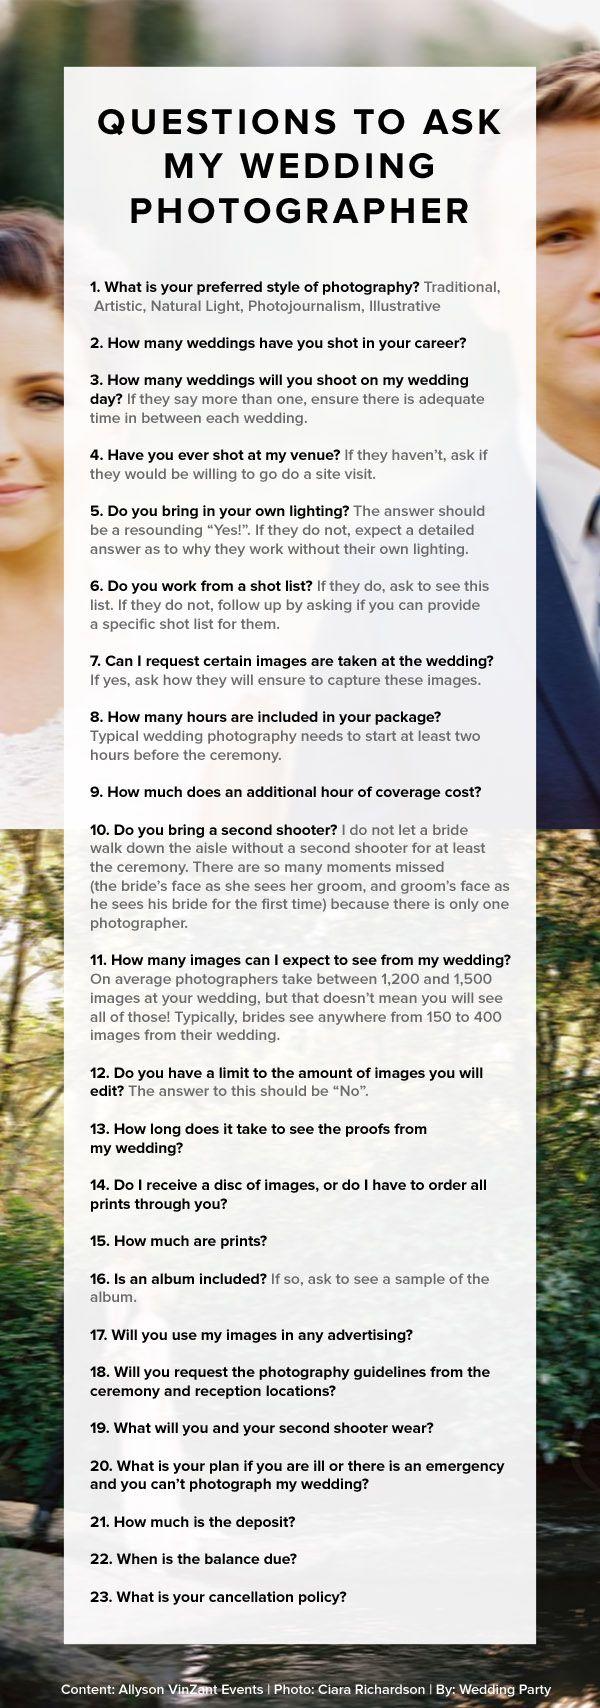 Wedding - Questions To Ask My Wedding Photographer By Allyson VinZant Events